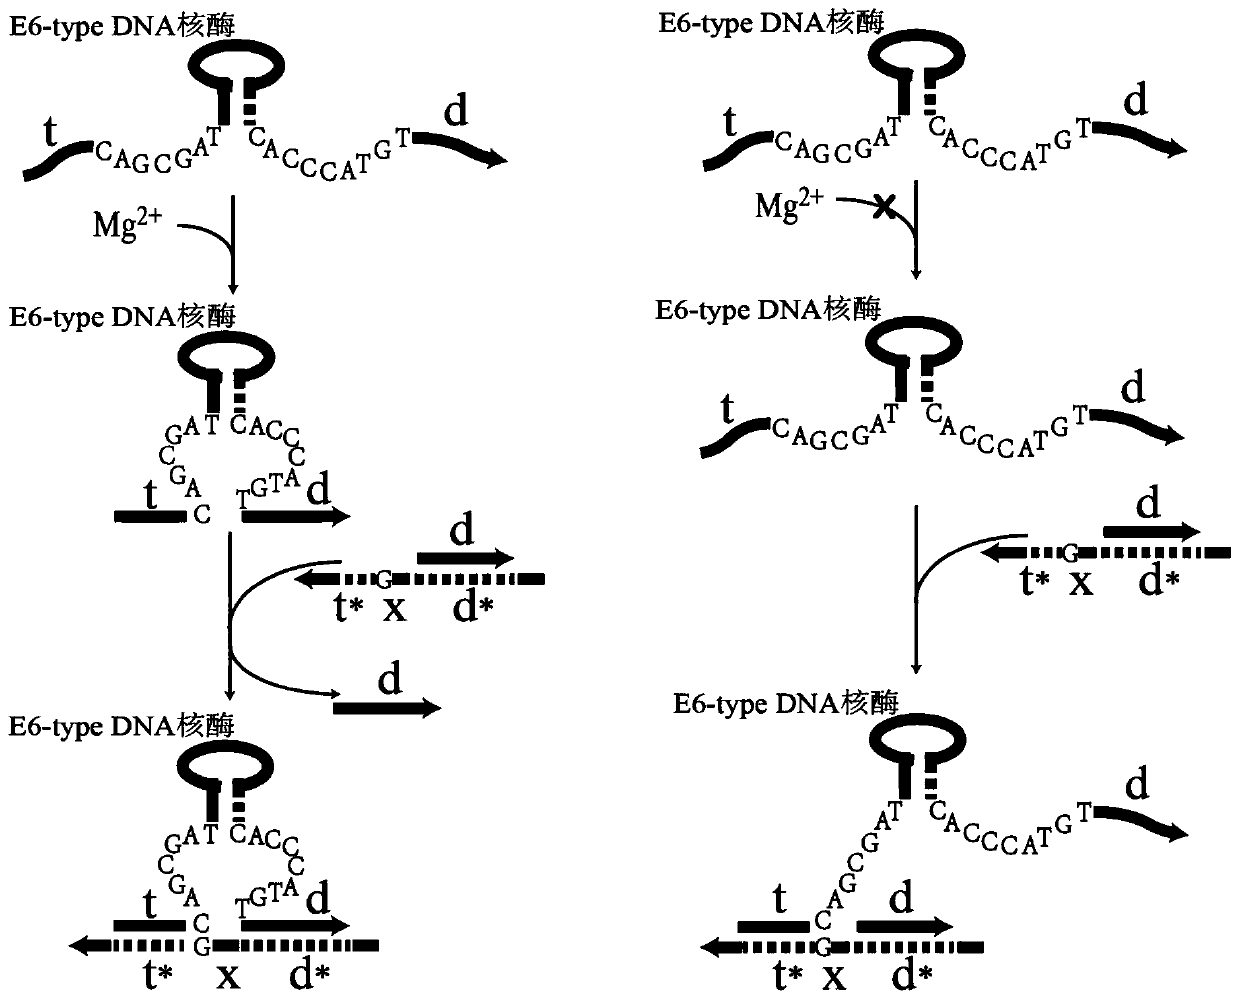 Remote DNA strand displacement method of magnesium ion induced E6-type DNA ribozyme allosterism